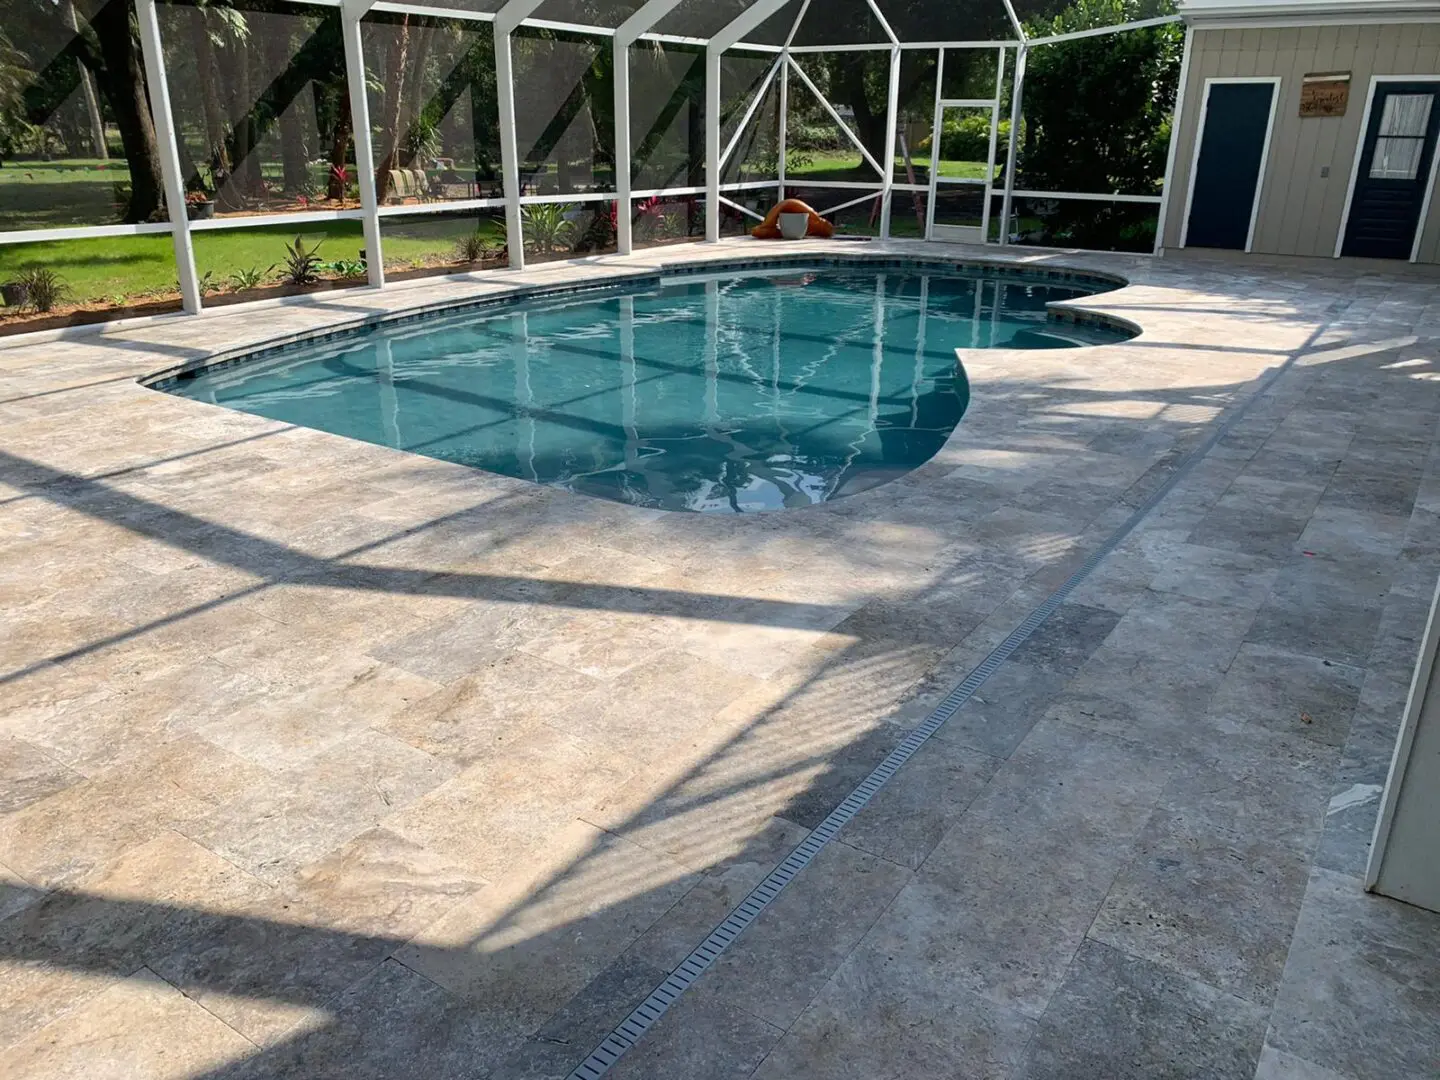 A backyard swimming pool with a stone patio and a screened enclosure. There is a storage shed adjacent to the pool.